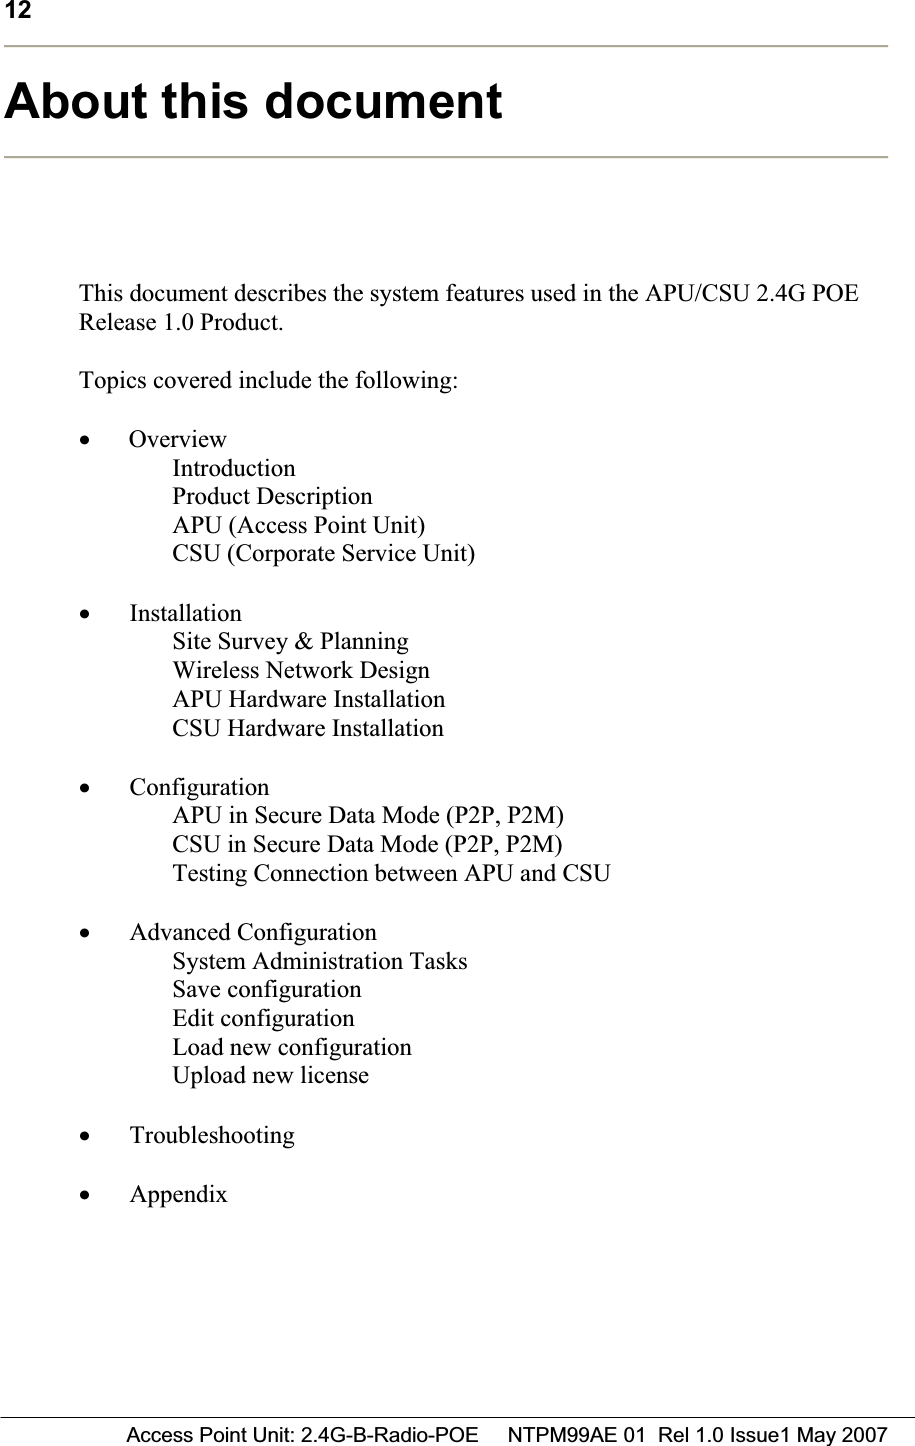 12 Access Point Unit: 2.4G-B-Radio-POE     NTPM99AE 01  Rel 1.0 Issue1 May 2007About this document This document describes the system features used in the APU/CSU 2.4G POE Release 1.0 Product. Topics covered include the following: x  Overview IntroductionProduct Description APU (Access Point Unit) CSU (Corporate Service Unit) xInstallation Site Survey &amp; Planning Wireless Network Design APU Hardware Installation CSU Hardware Installation xConfigurationAPU in Secure Data Mode (P2P, P2M) CSU in Secure Data Mode (P2P, P2M) Testing Connection between APU and CSU xAdvanced Configuration System Administration Tasks Save configuration Edit configuration Load new configuration Upload new license xTroubleshootingxAppendix